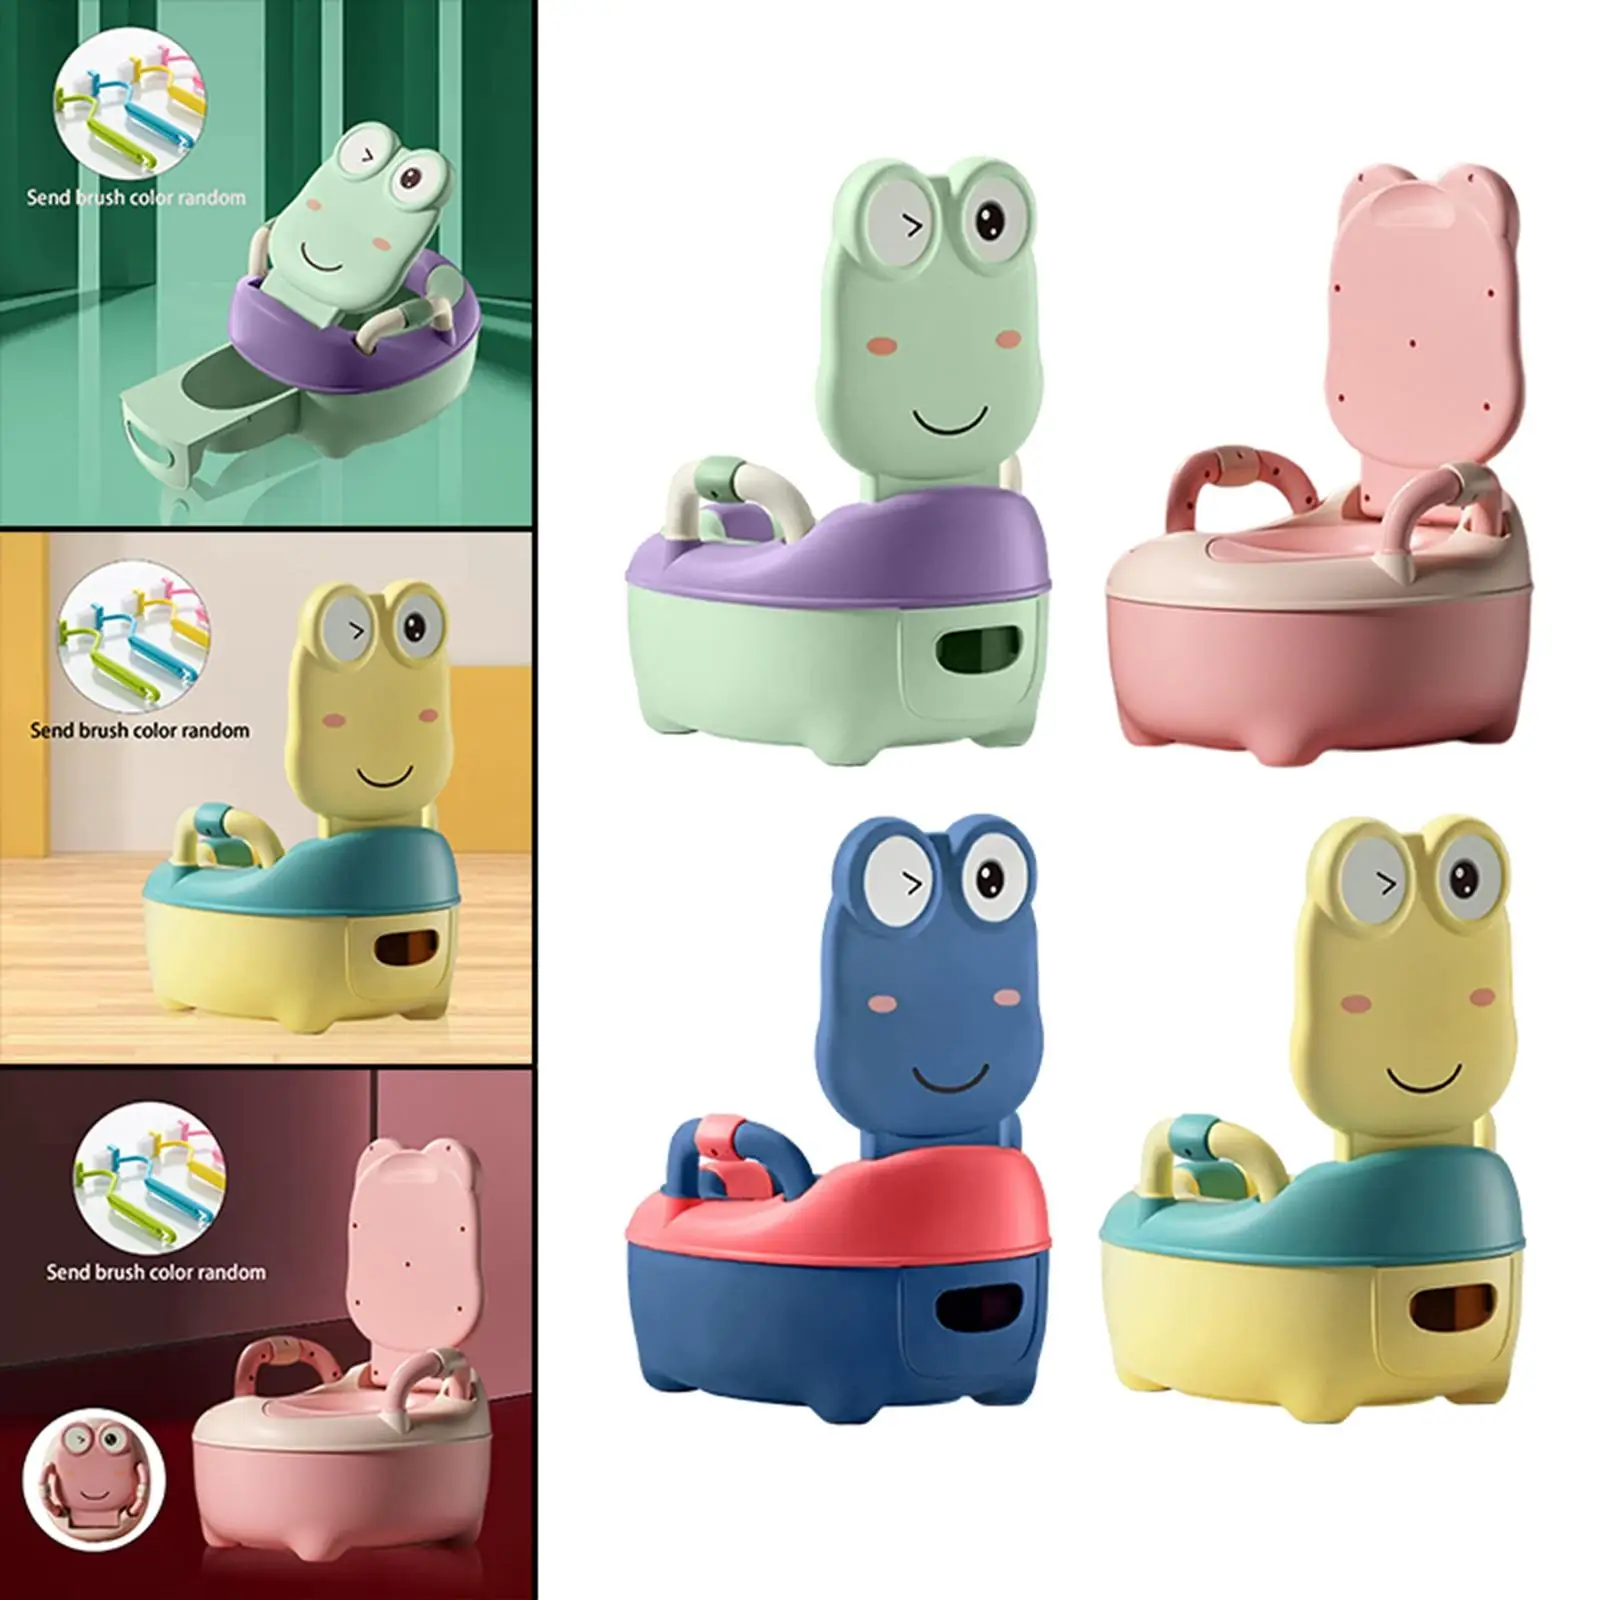 baby Toilet Seat Potty Stool Urinal Bedpan Removable Container Comfortable Easy Cleaning for Babies 0-6 Years Old Children